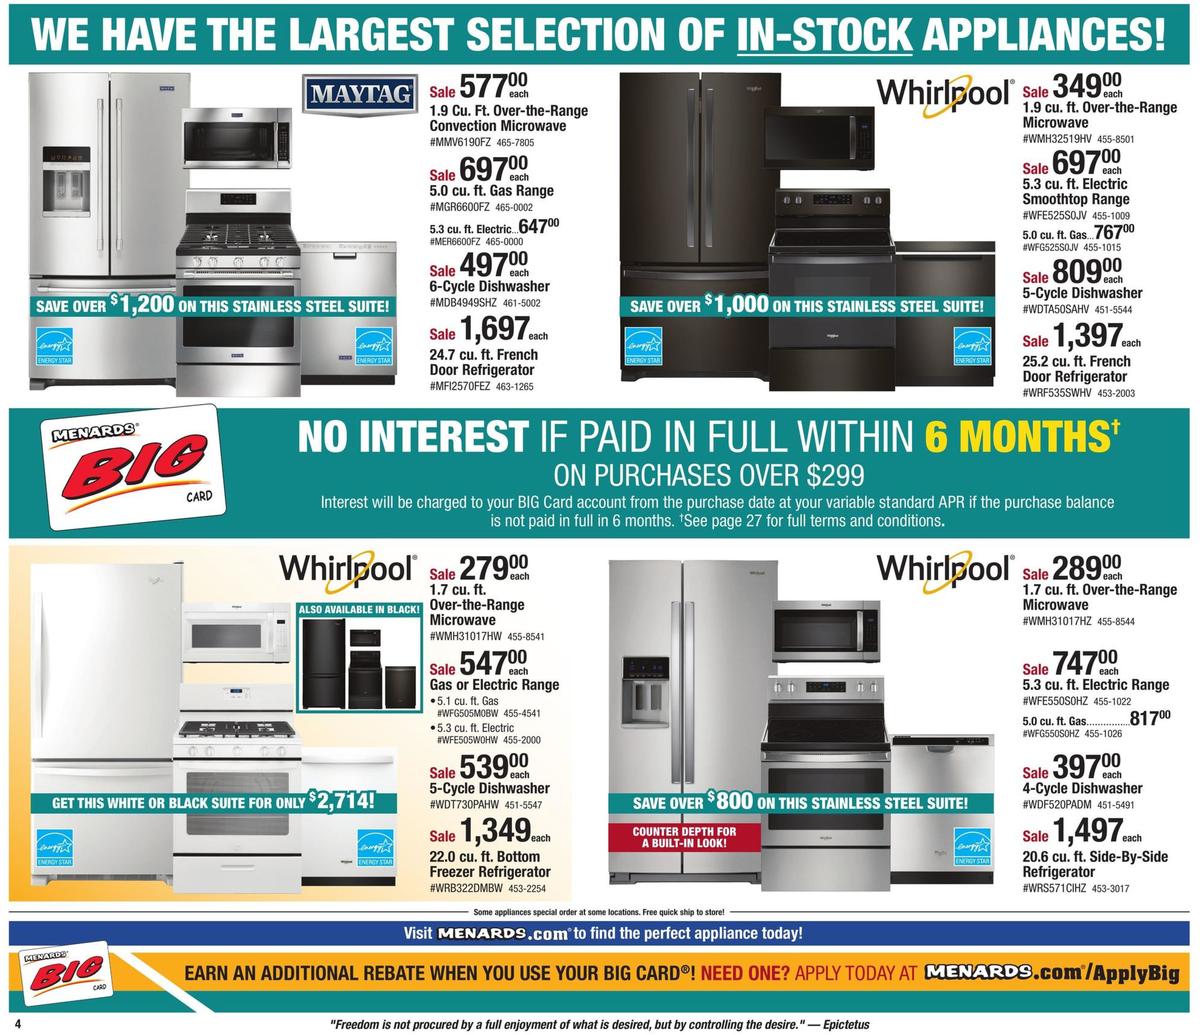 Menards Weekly Ad from January 12